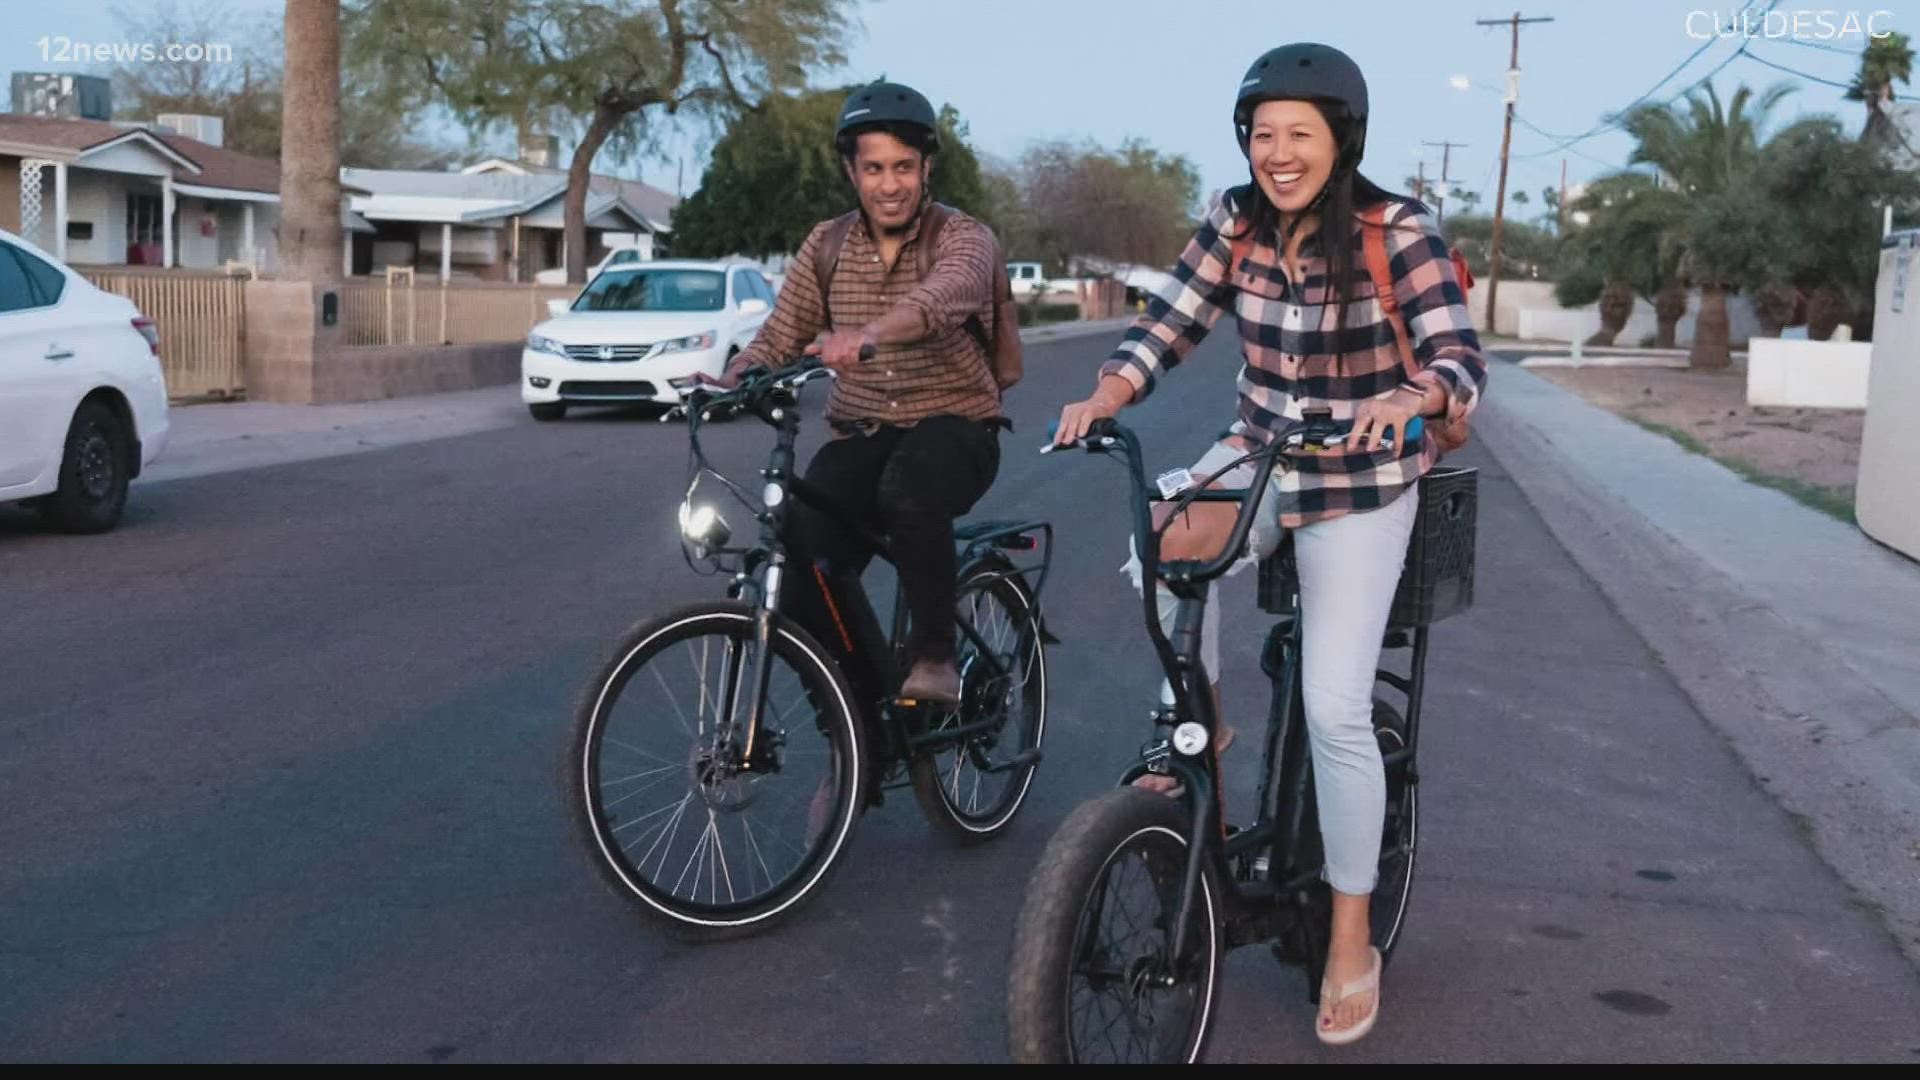 E-bikes are about to change the world - at least if you ask the CEO and co-founder of the first car-free neighborhood built in Arizona expected to open this summer.